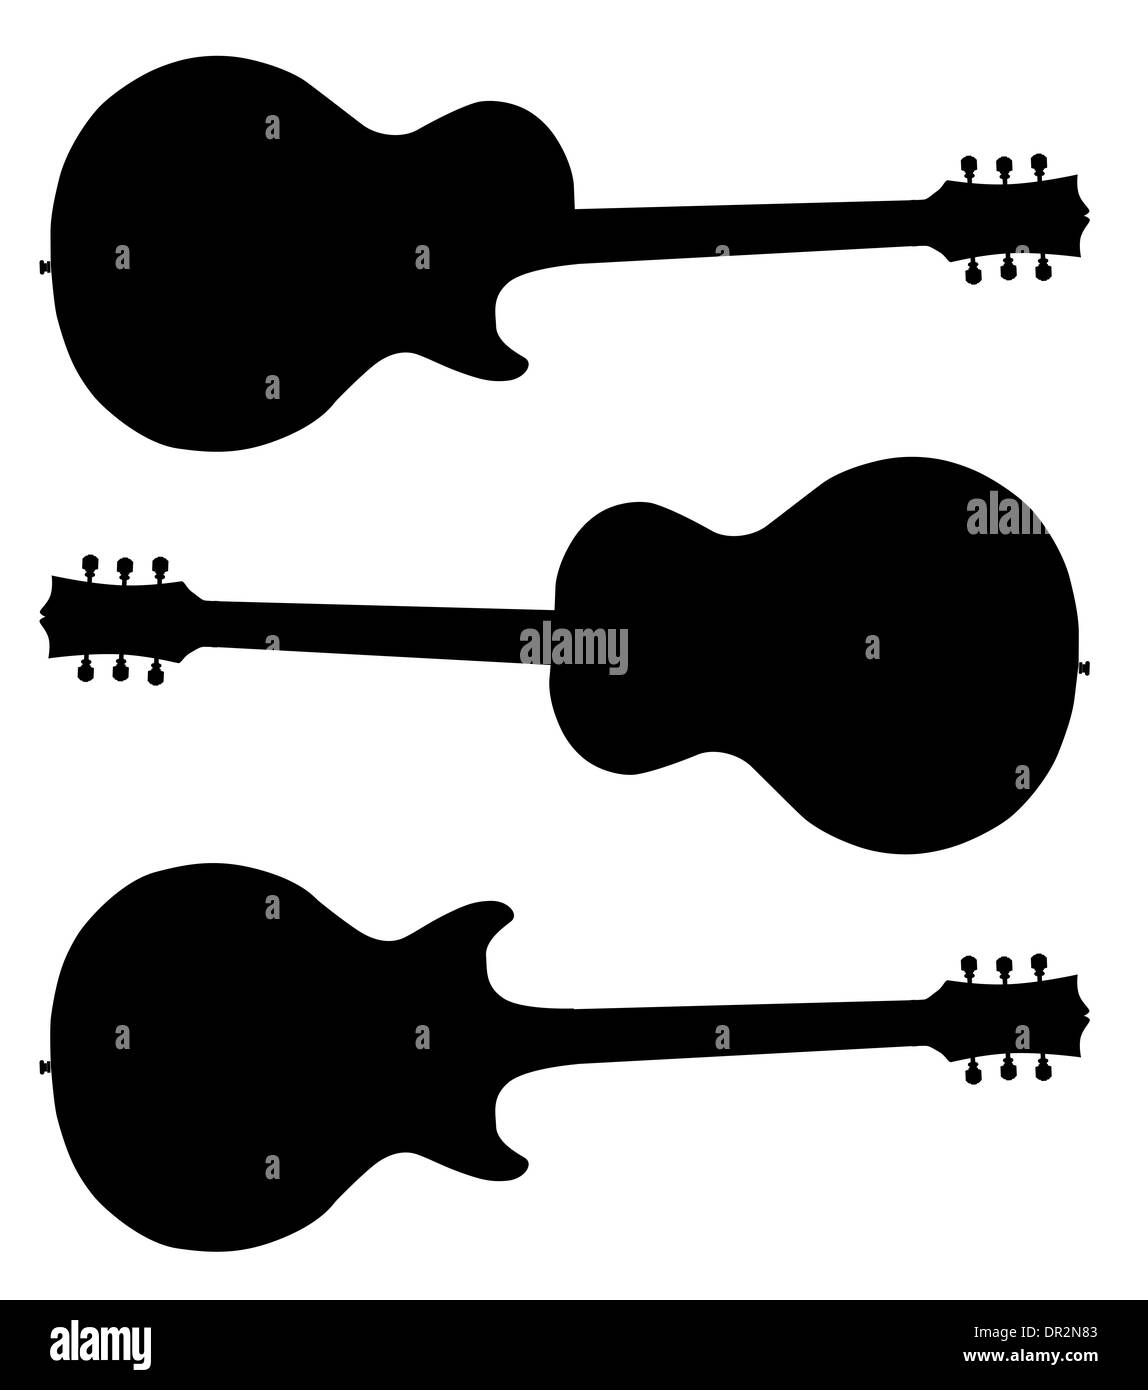 Traditional guitar shape silhouettes isolated over a white background Stock Photo